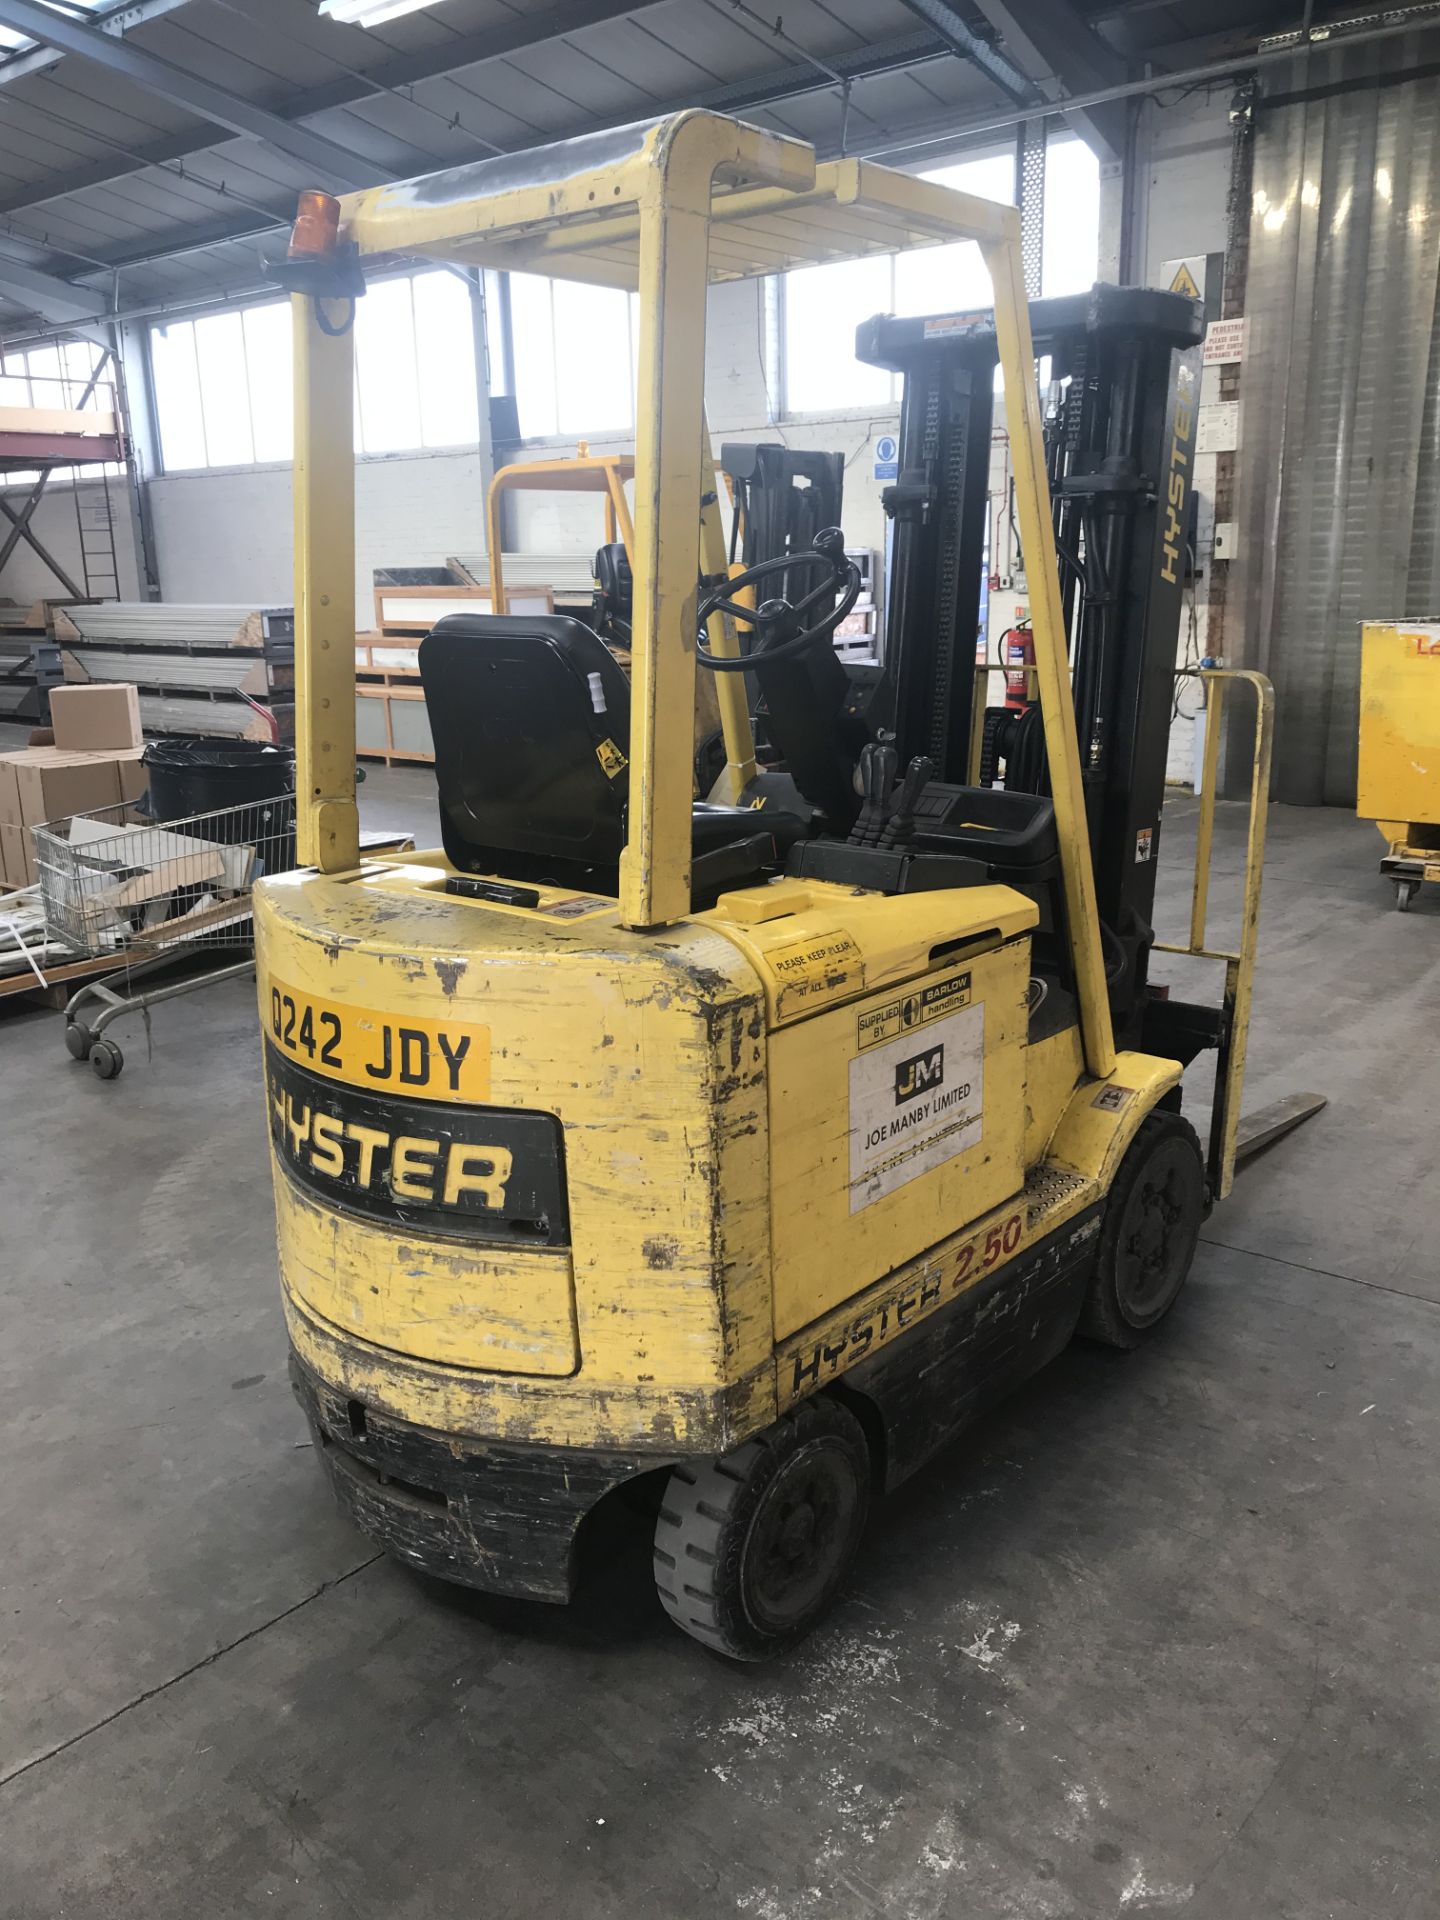 Hyster E2.50XM Electric Forklift Truck, registrati - Image 3 of 5